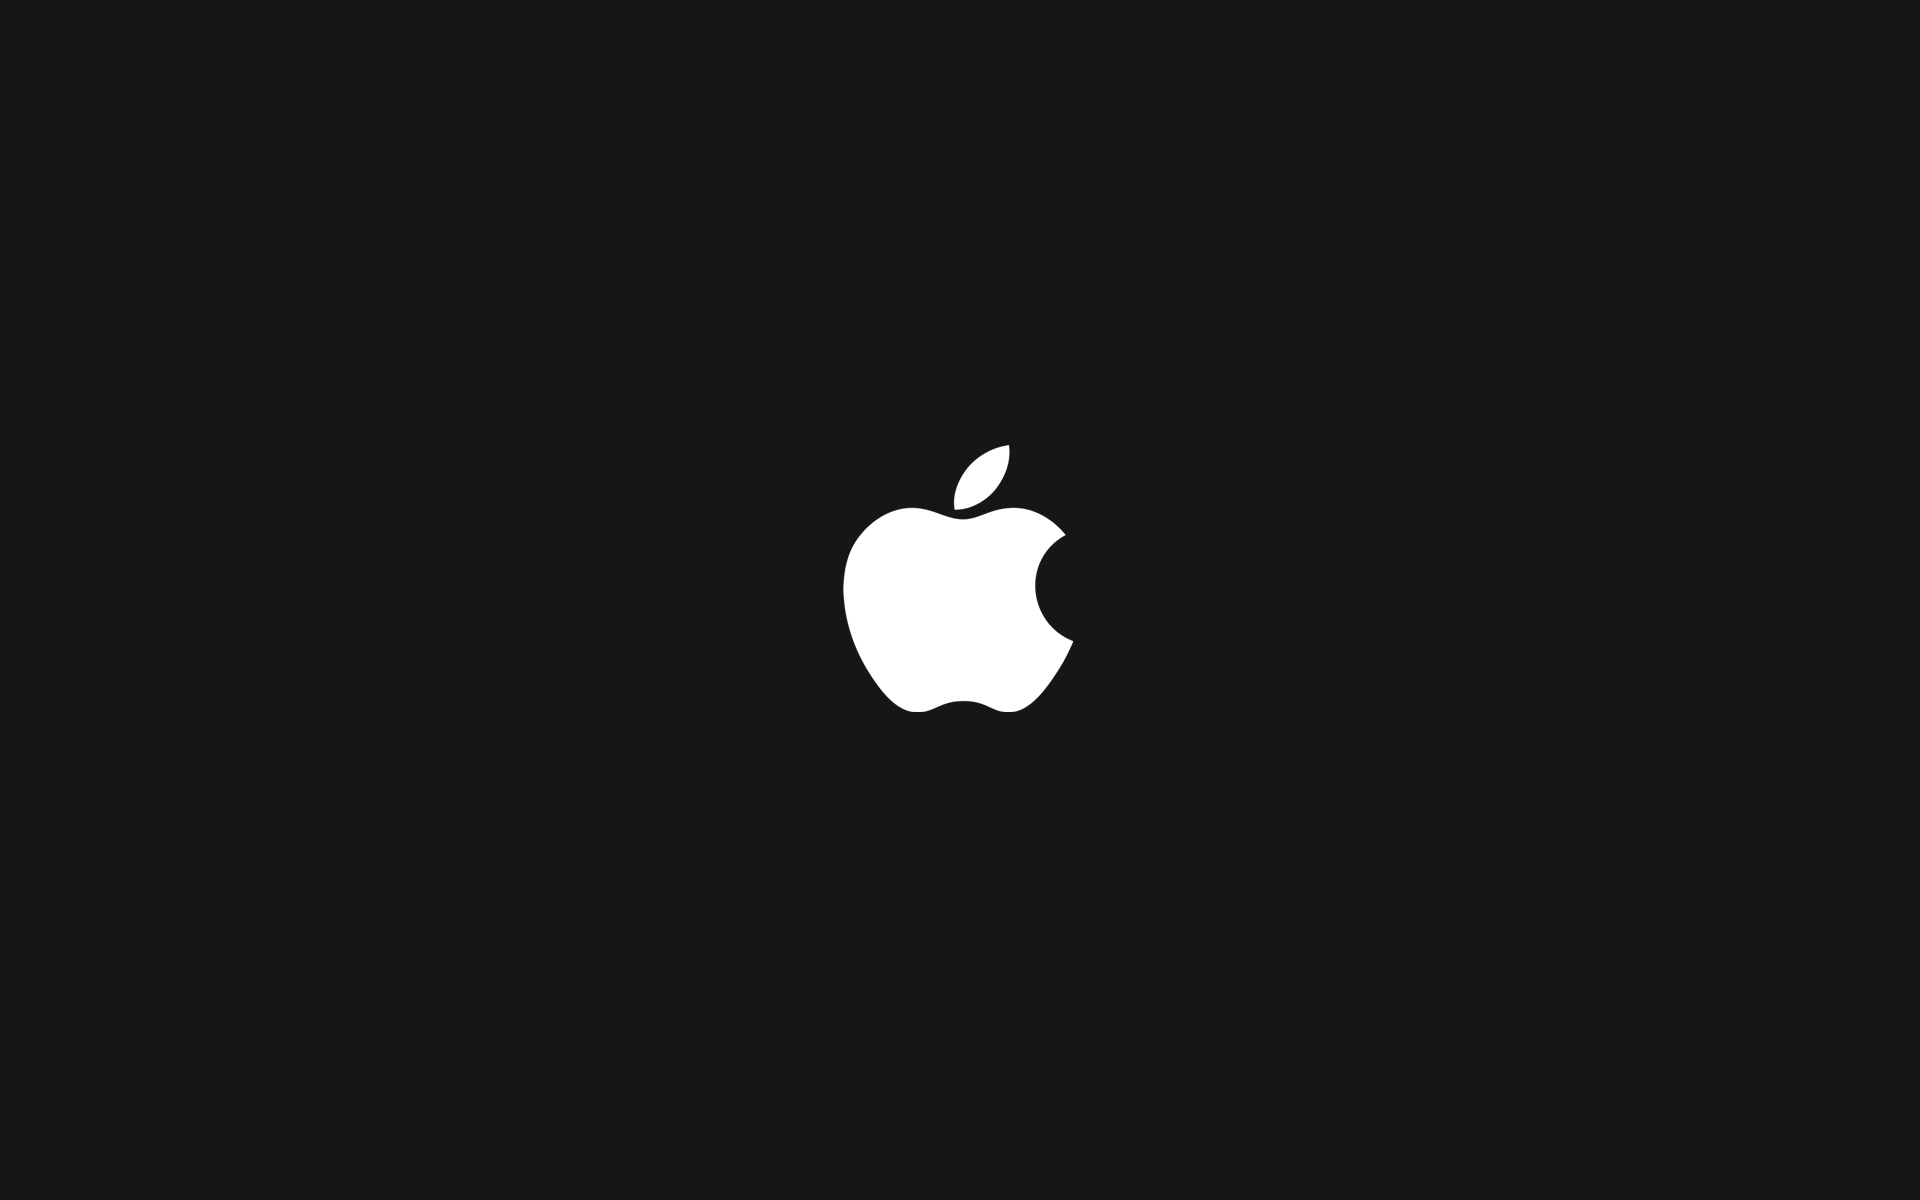 Apple Black Best Background Full HD1920x1080p, 1280x720p, – HD Wallpapers Backgrounds Desktop, iphone & Android Free Download